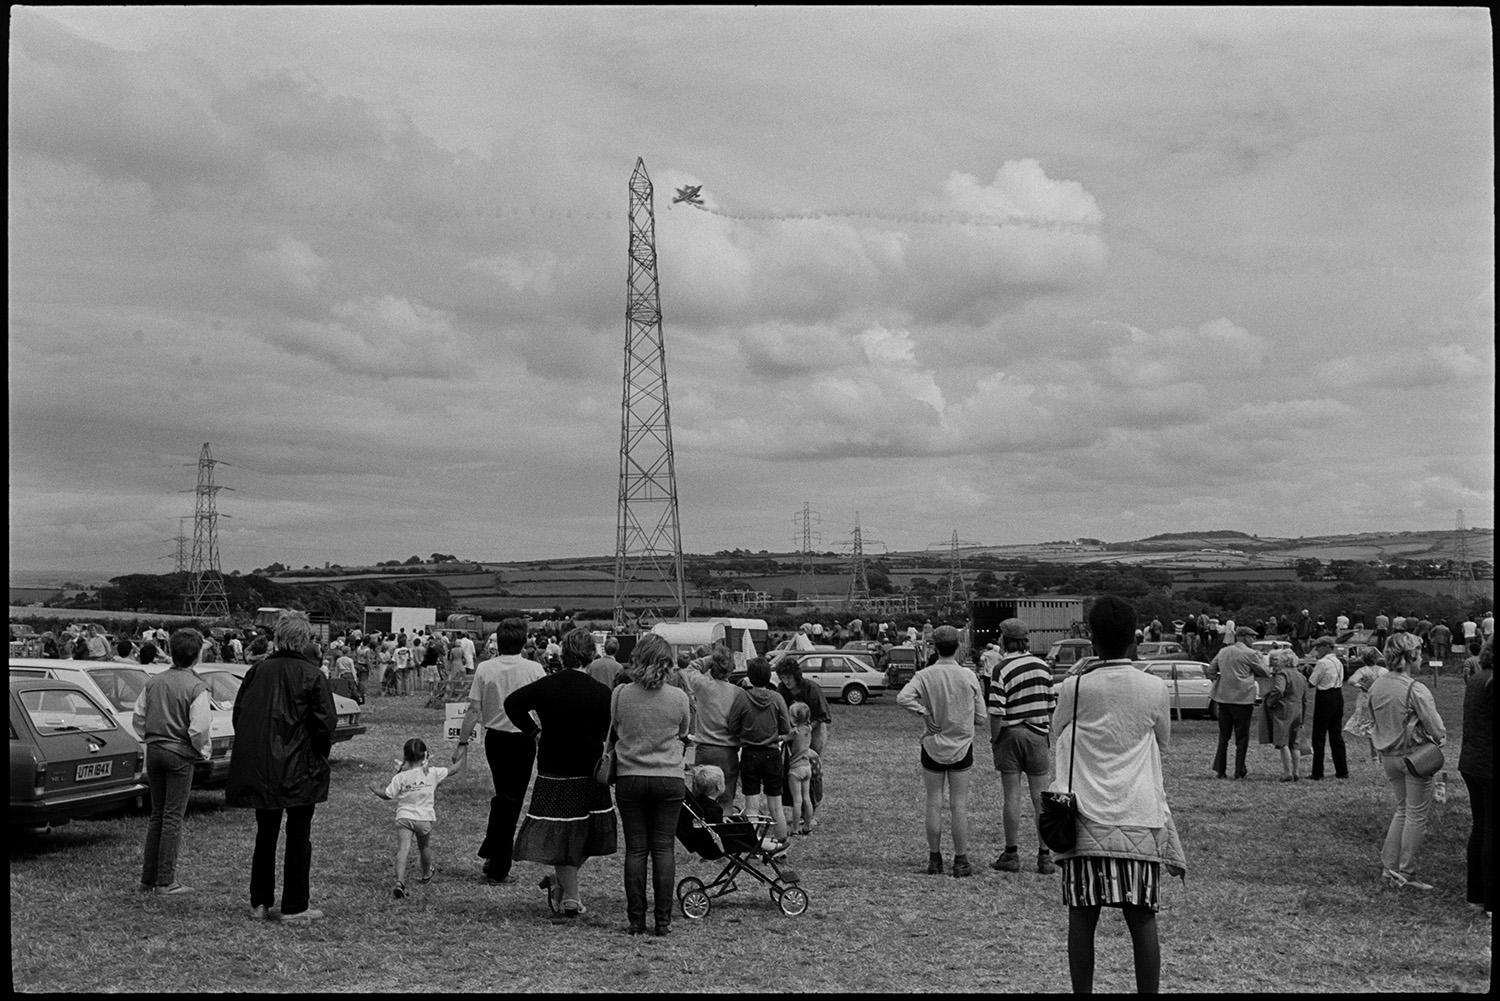 North Devon Show, Prize cattle, sheep, exhibitions etc.
[Spectators at the North Devon Show, near Alverdiscott, watching an aerial display. Parked vehicles and fields are visible in the background with electricity pylons.]